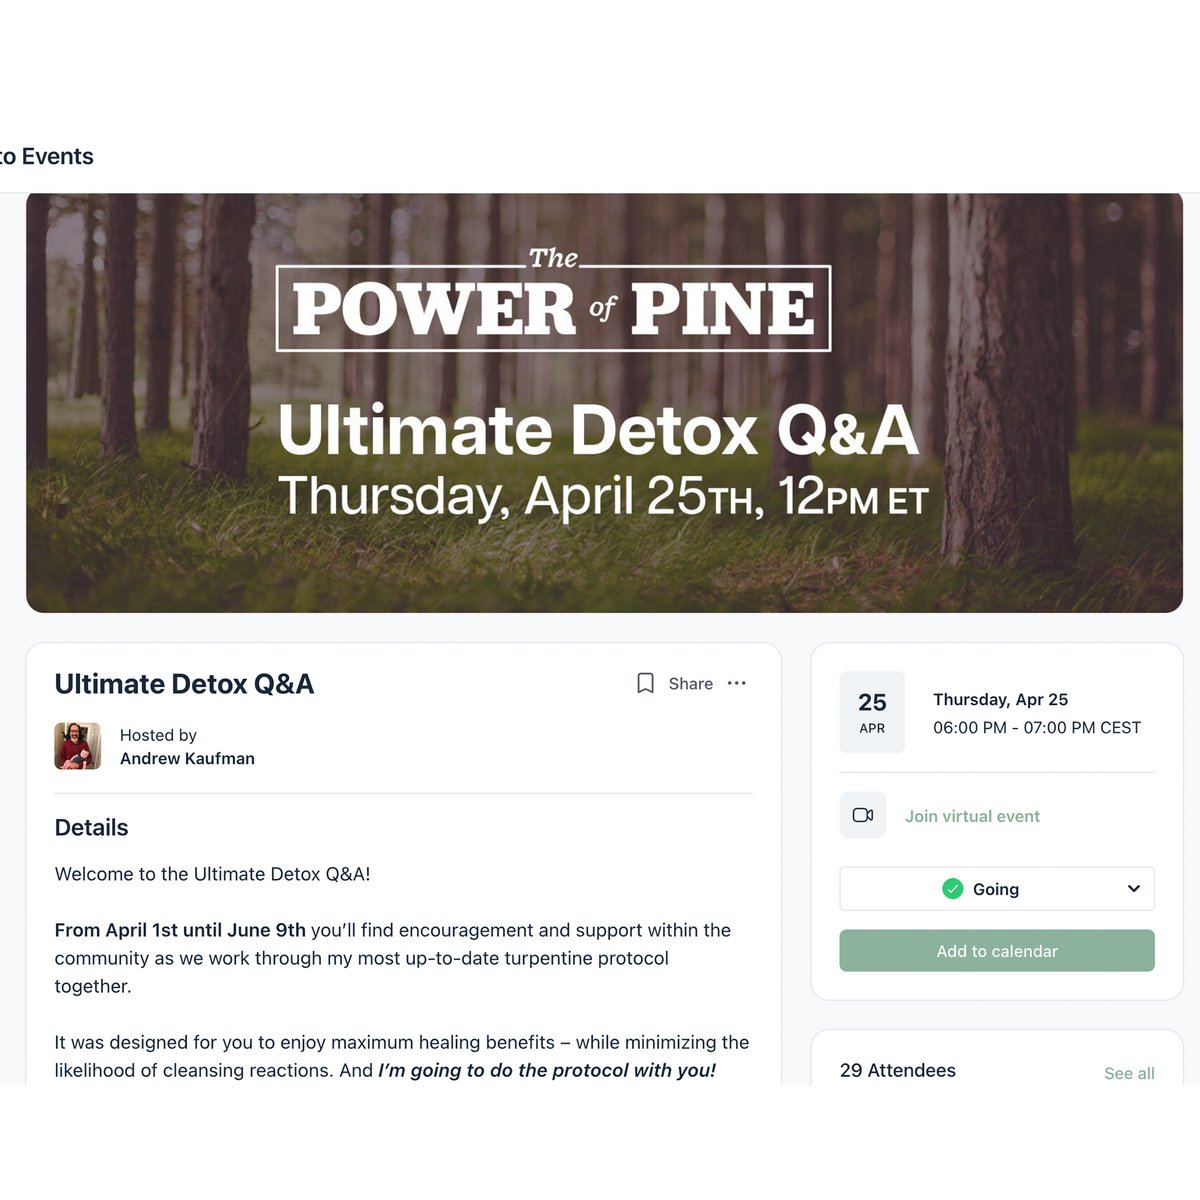 If you purchased the latest Terrain Workshop, The Power of Pine: The Ultimate Detox, you’ll be invited to join an exclusive group going through the turpentine detox protocol together, April 1st - June 9th. offerings.andrewkaufmanmd.com/true-living-fe…